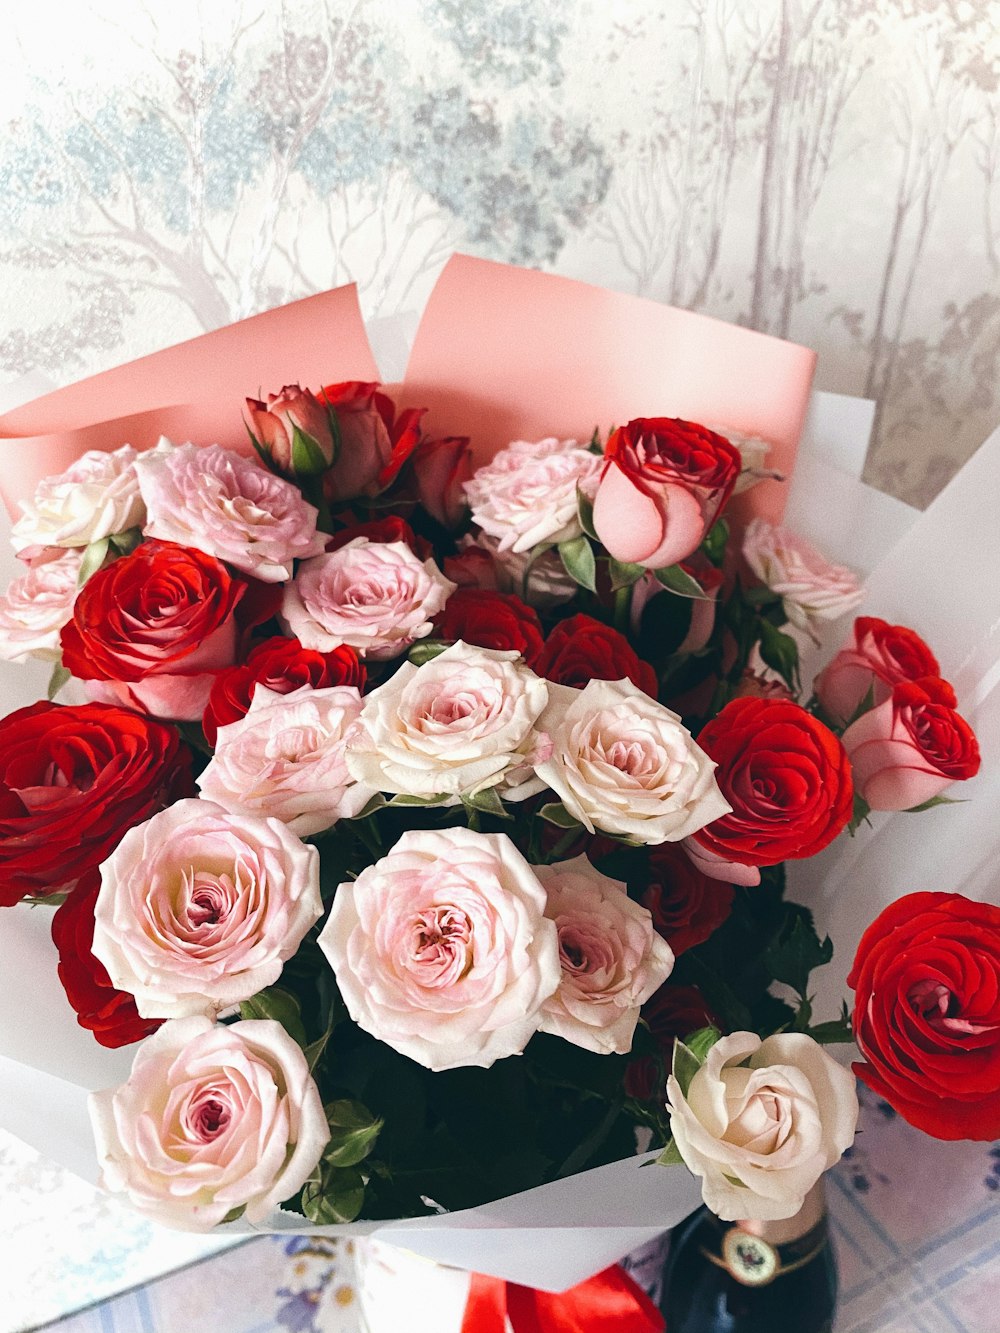 1000+ Rose Bouquet Pictures  Download Free Images on Unsplash